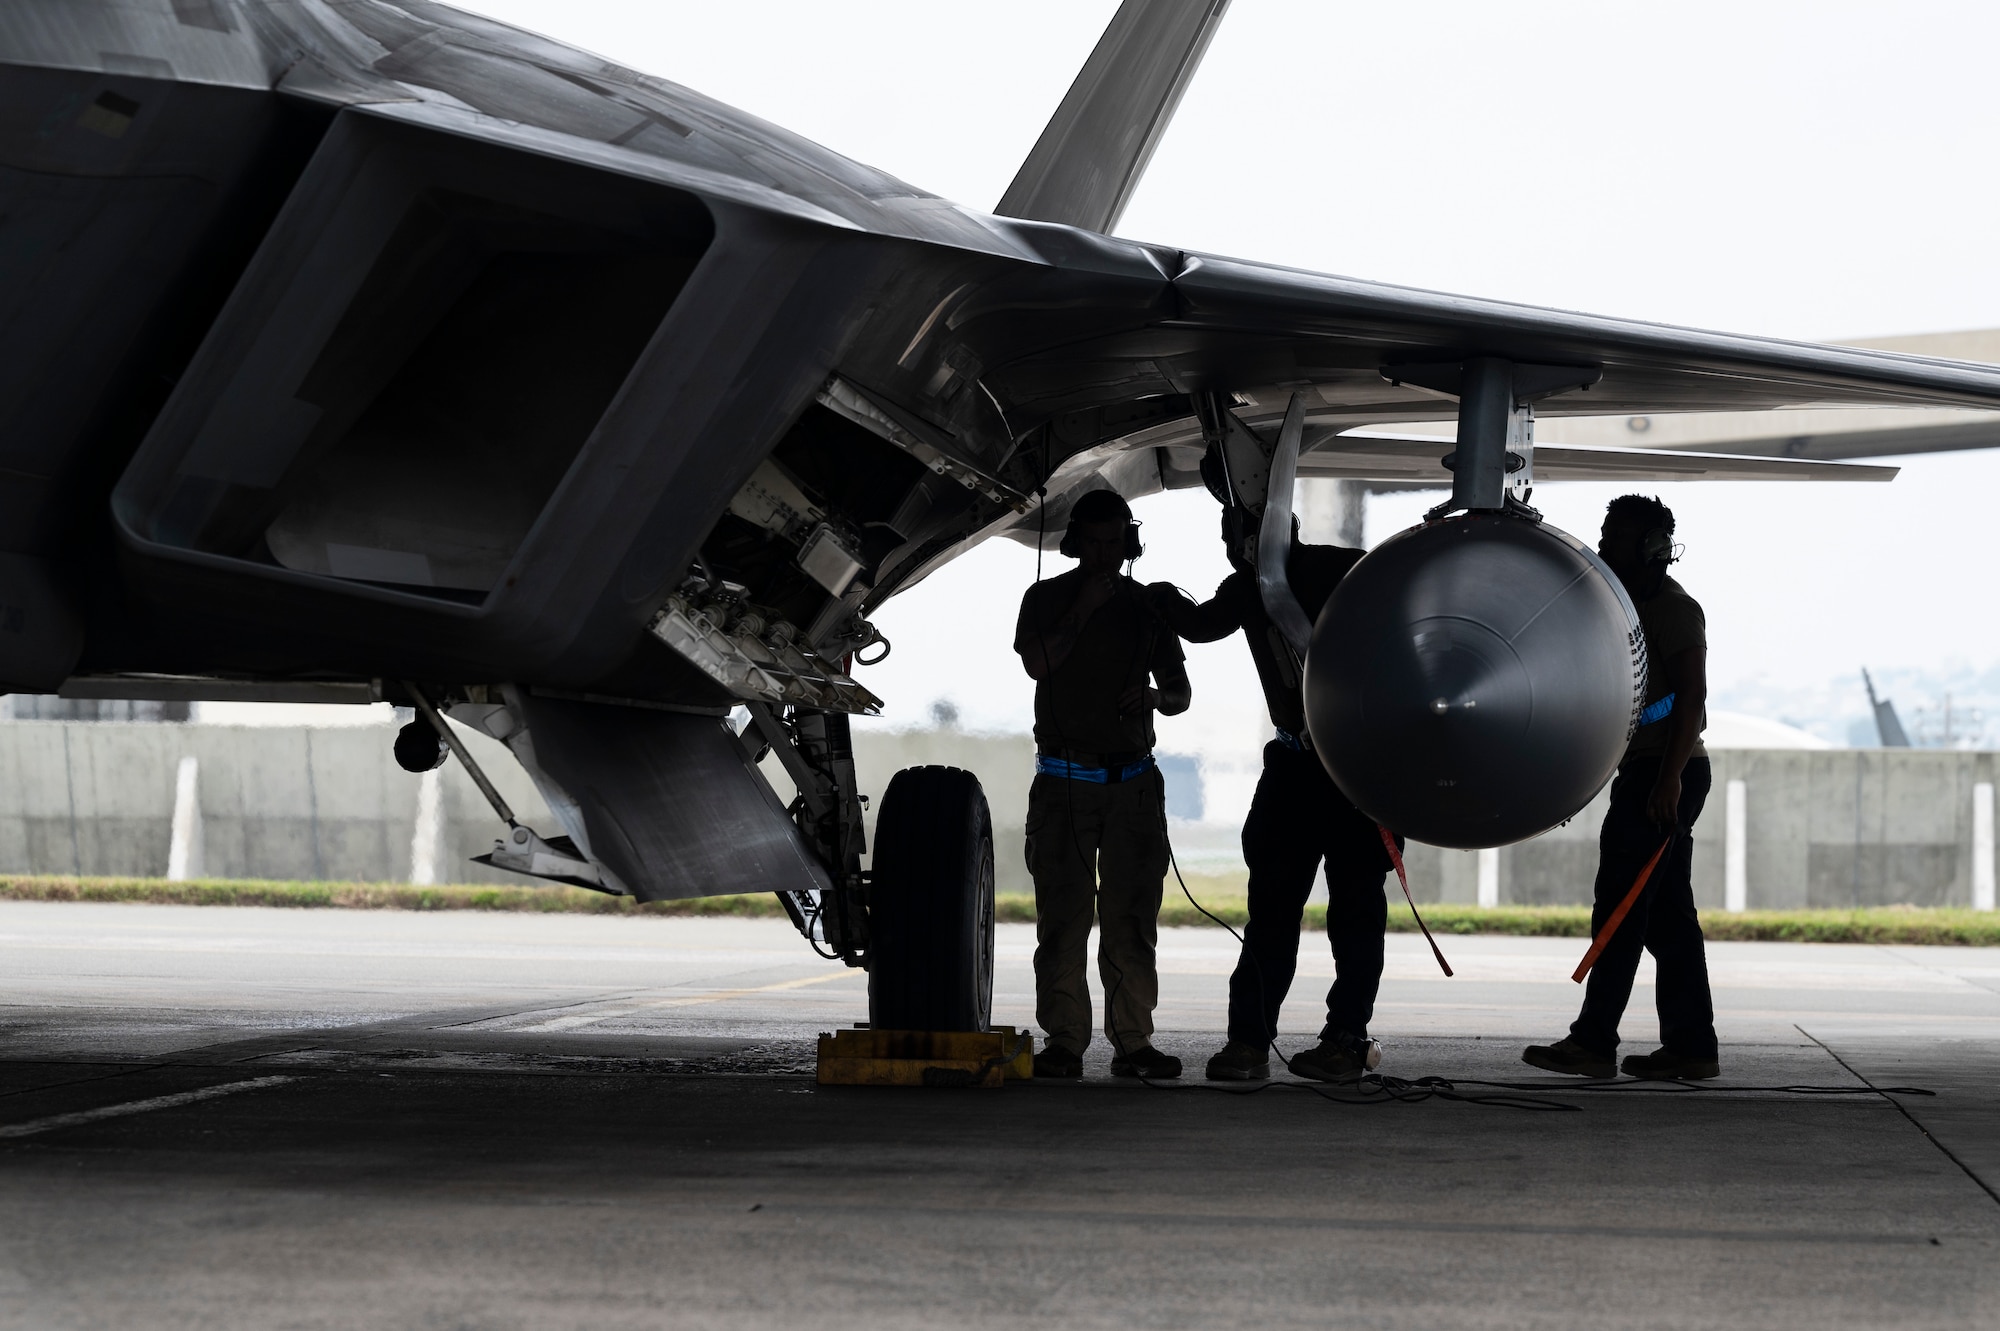 U.S. Air Force maintenance personnel assigned to the 3rd Aircraft Maintenance Squadron conduct recovery procedures on an F-22 Raptor assigned to the 525th Fighter Squadron as it arrives for a temporary deployment to Kadena Air Base, Japan, Nov. 8, 2022. The Raptors, hailing from Joint Base Elmendorf-Richardson, Alaska, will work in conjunction with local Kadena-based assets to enhance U.S. operational readiness to defend Japan and ensure a free and open Indo-Pacific. (U.S. Air Force photo by Senior Airman Jessi Roth)